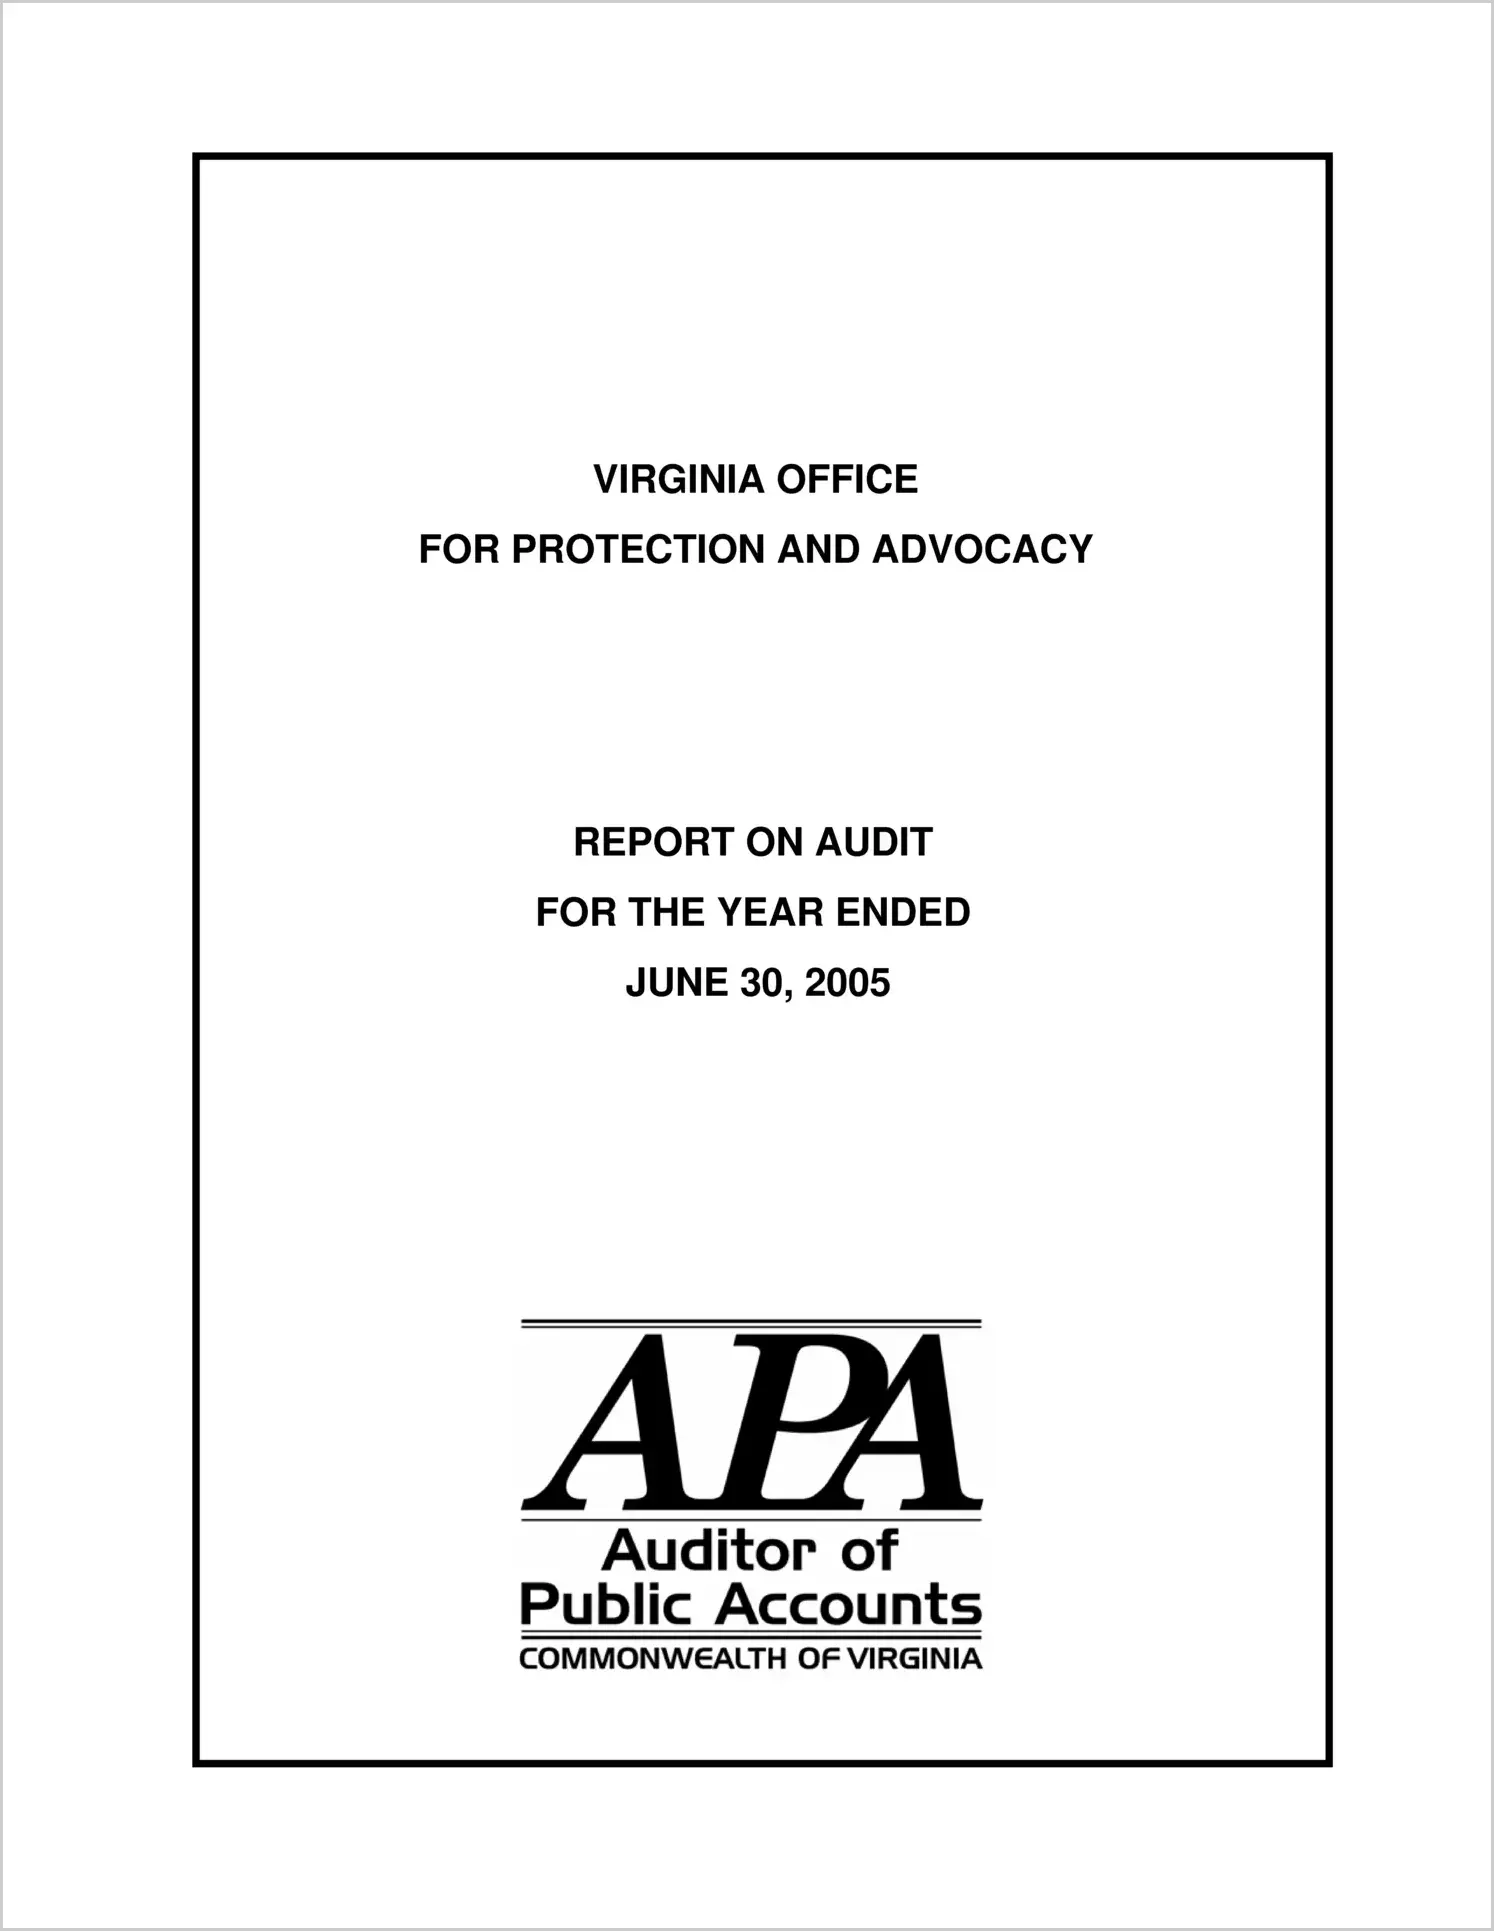 Virginia Office For Protection and Advocacy for the three-year period ended June 30, 2005